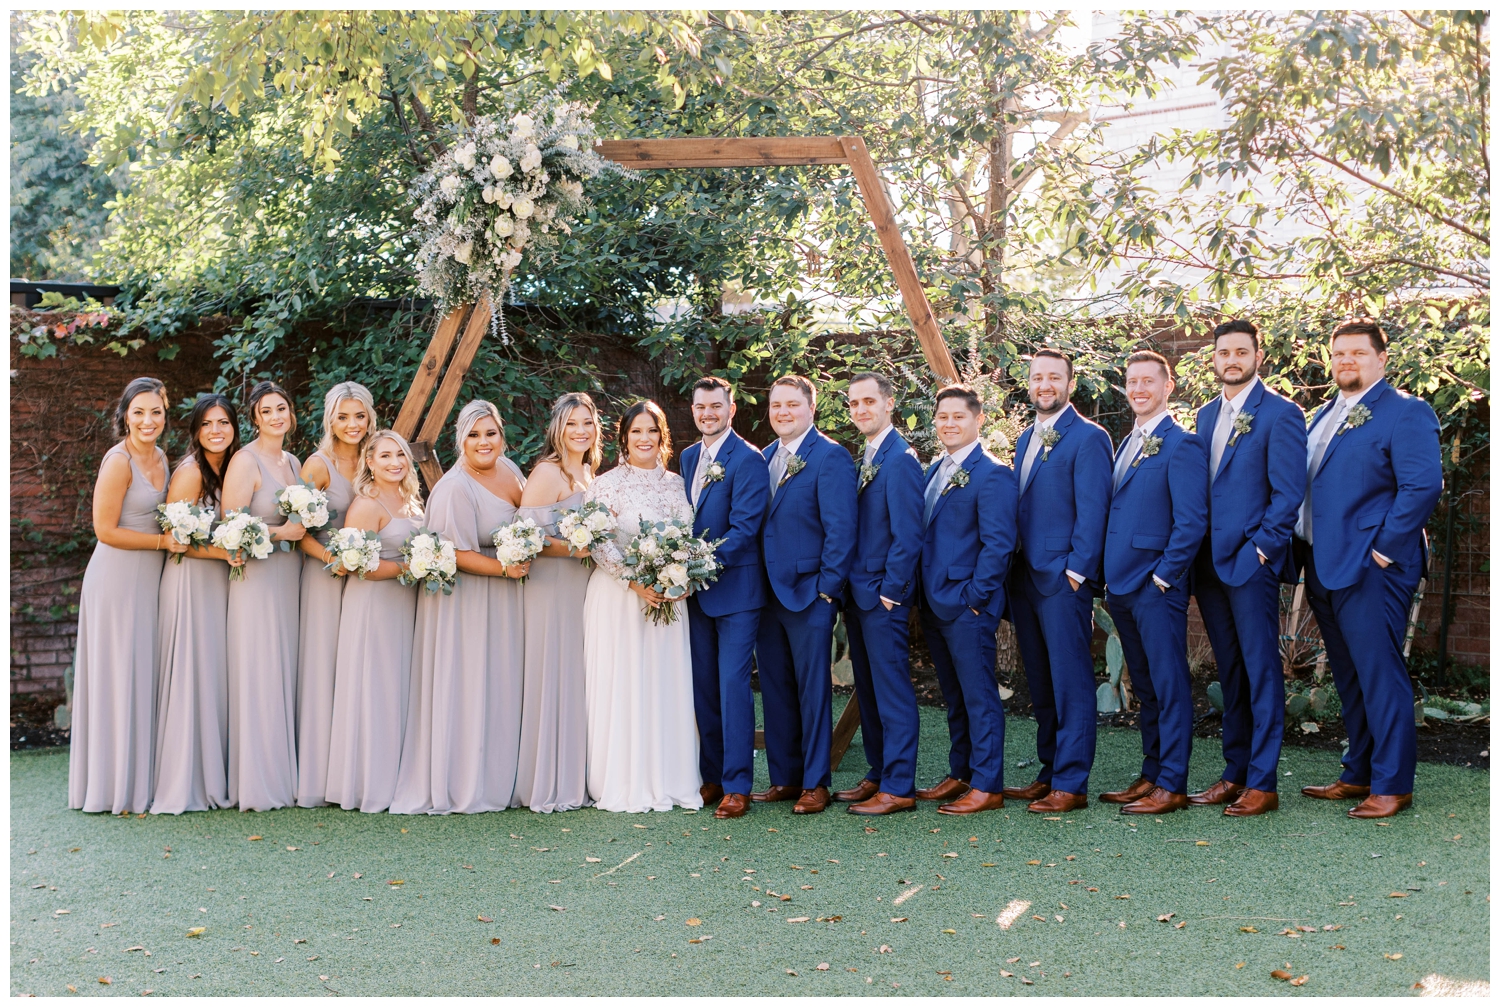 full bridal party portrait standing under hexagon floral arch groom in blue tux portrait standing under tree for Austin outdoor wedding